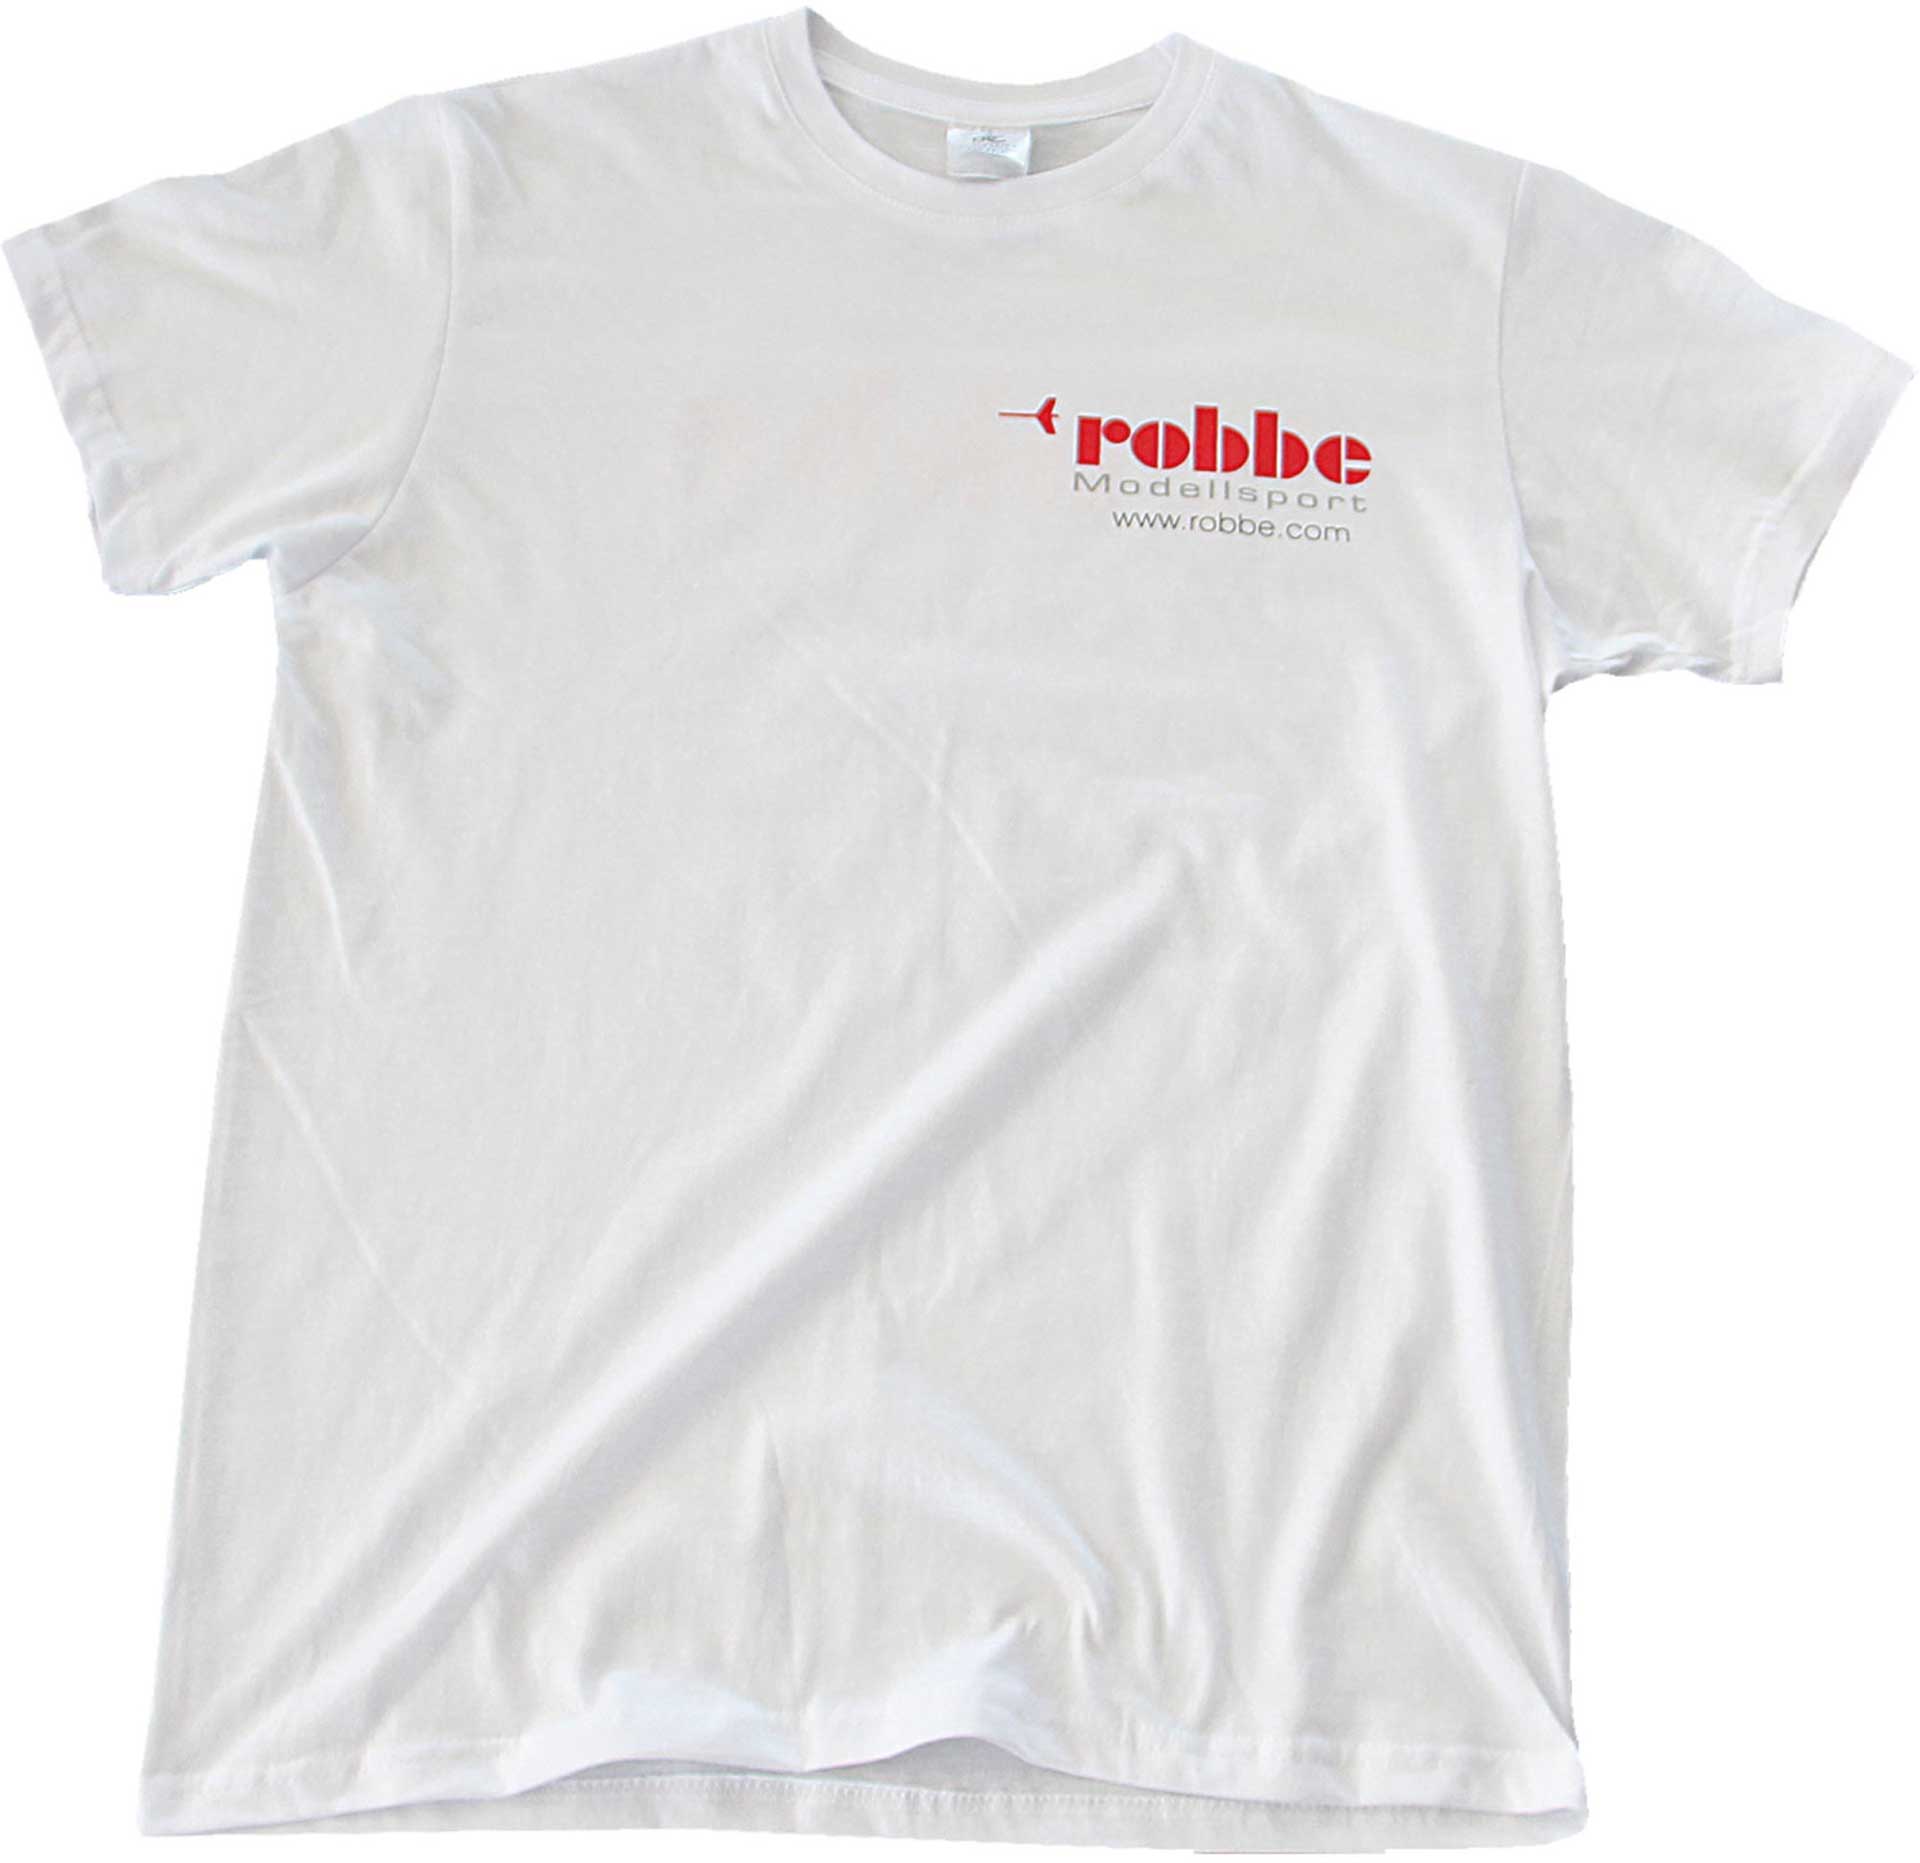 Robbe Modellsport T-SHIRT TAILLE L